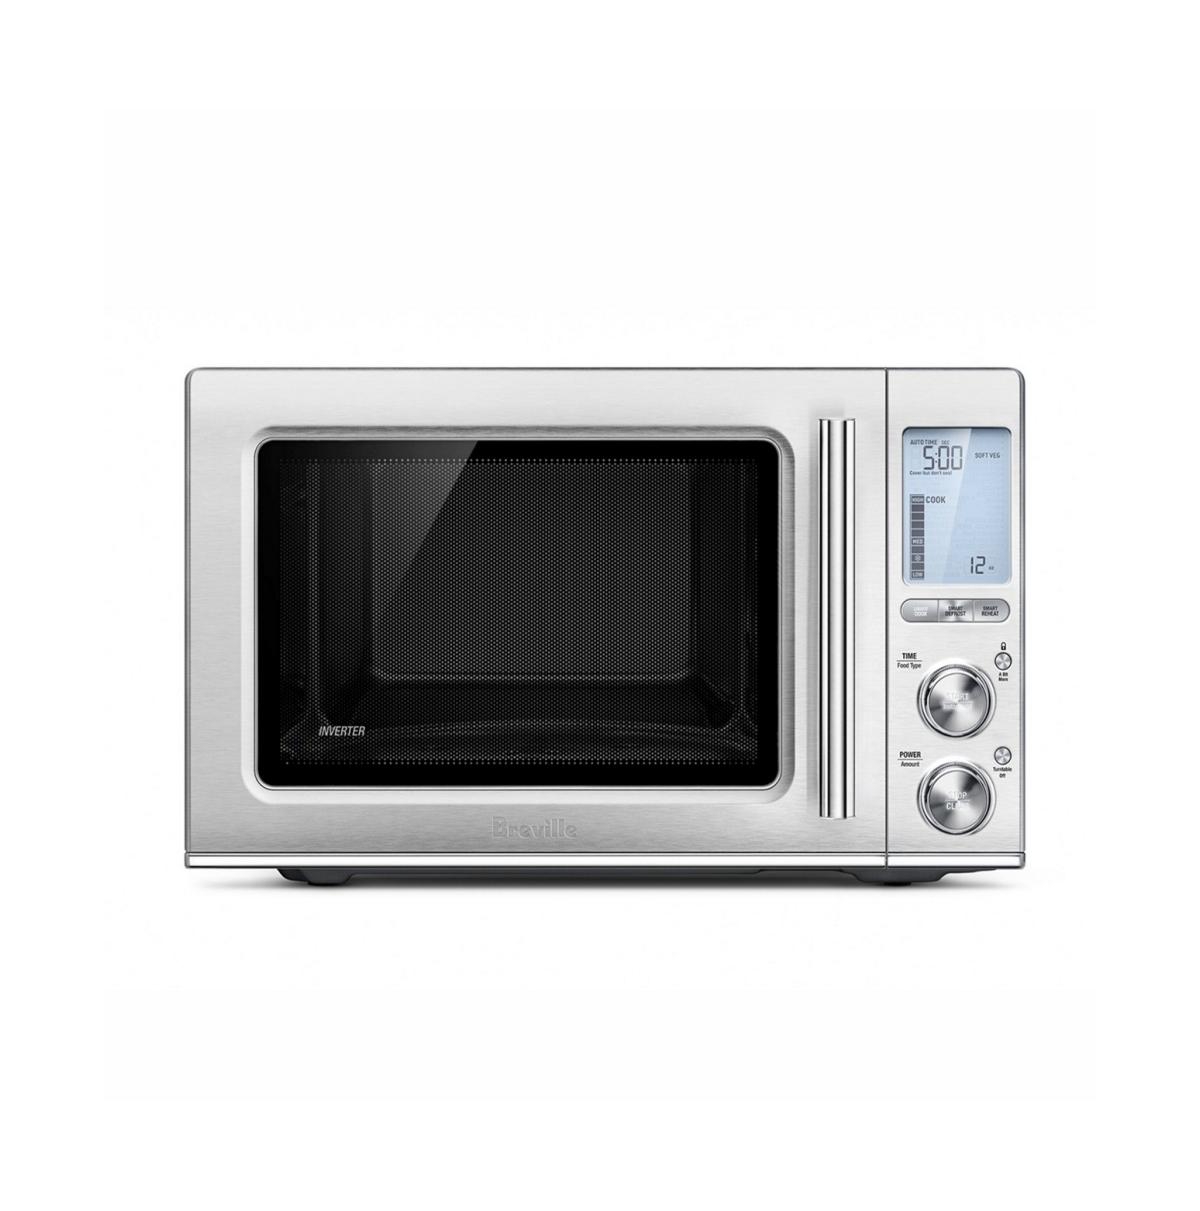 Breville The Smooth Wave Microwave Oven In Brushed Stainless Steel